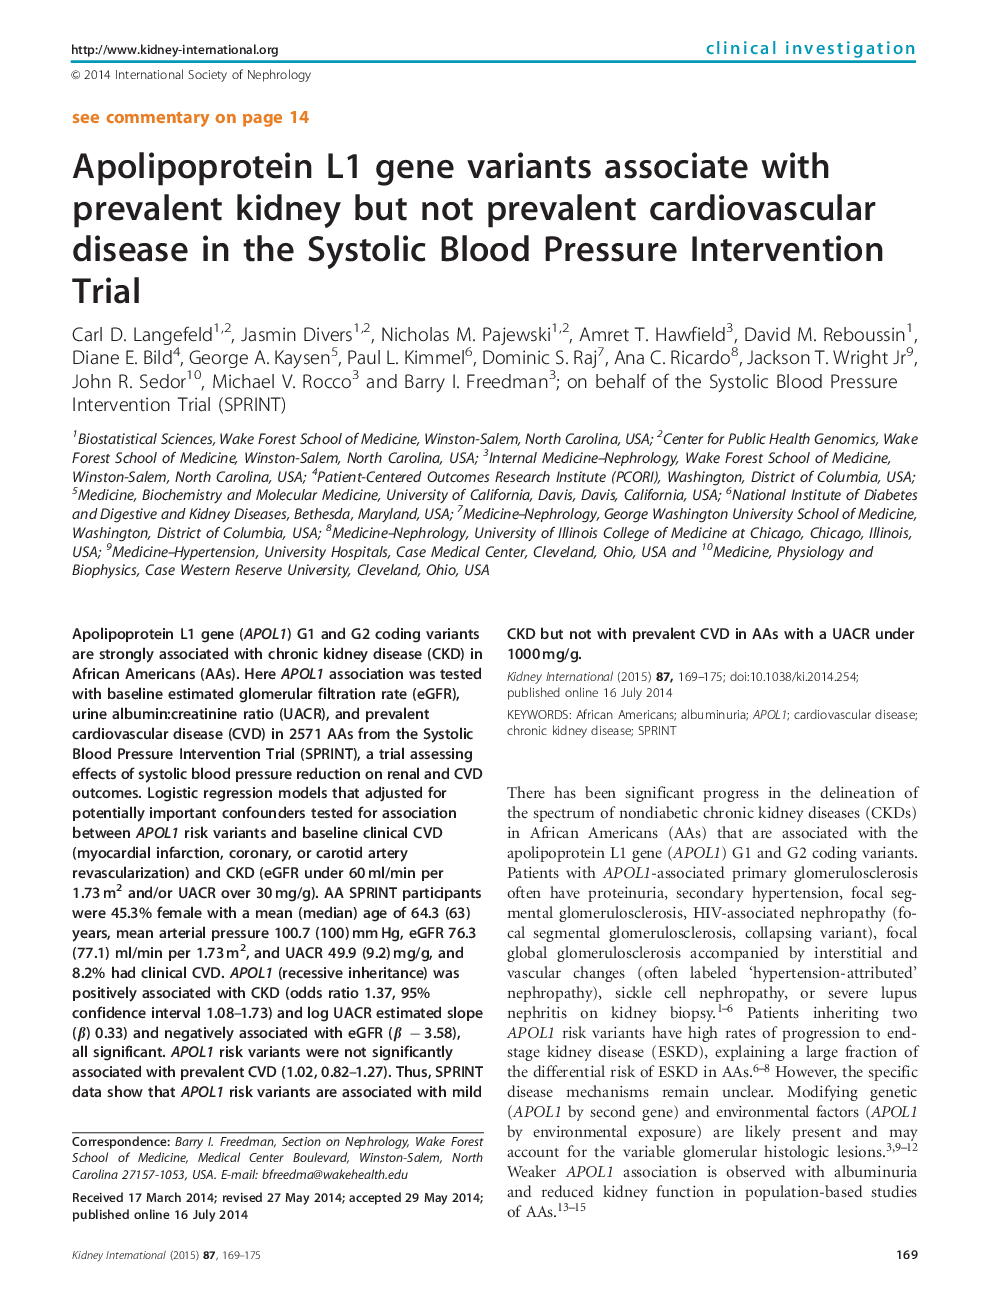 Apolipoprotein L1 gene variants associate with prevalent kidney but not prevalent cardiovascular disease in the Systolic Blood Pressure Intervention Trial